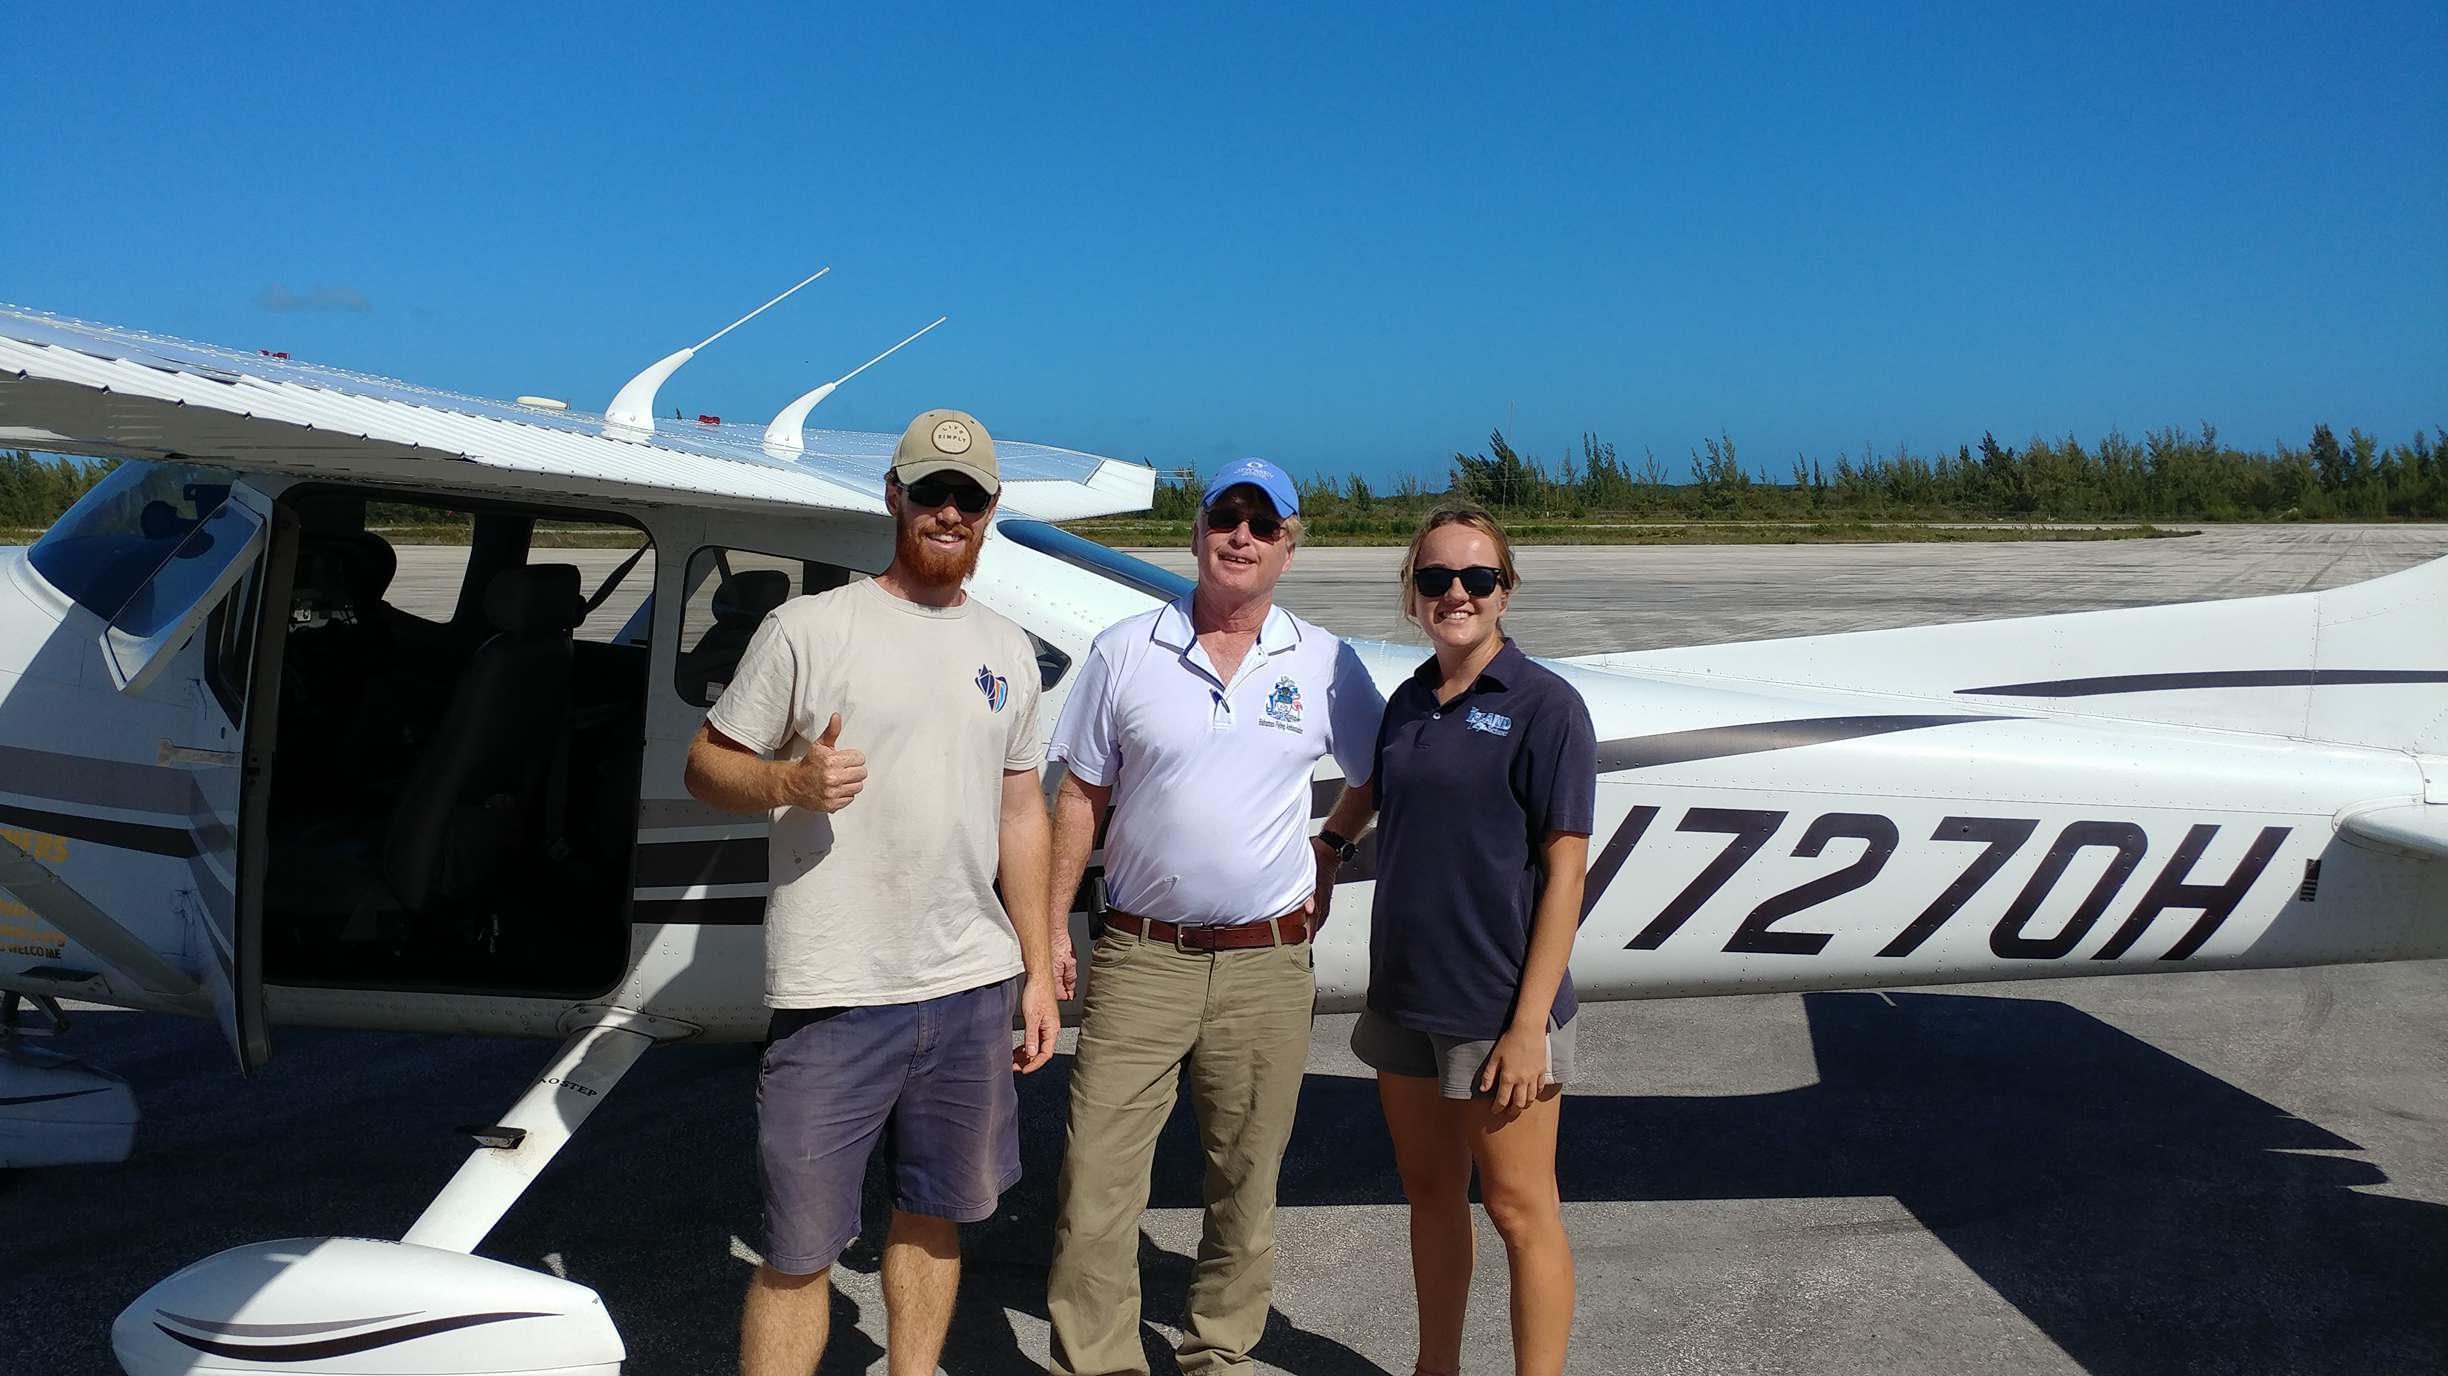 CEI researchers Eric Schneider (left) and Danielle Orrell (right) waving off Mark M. Steinberg (middle, pilot) transporting the samples to the US for analysis.